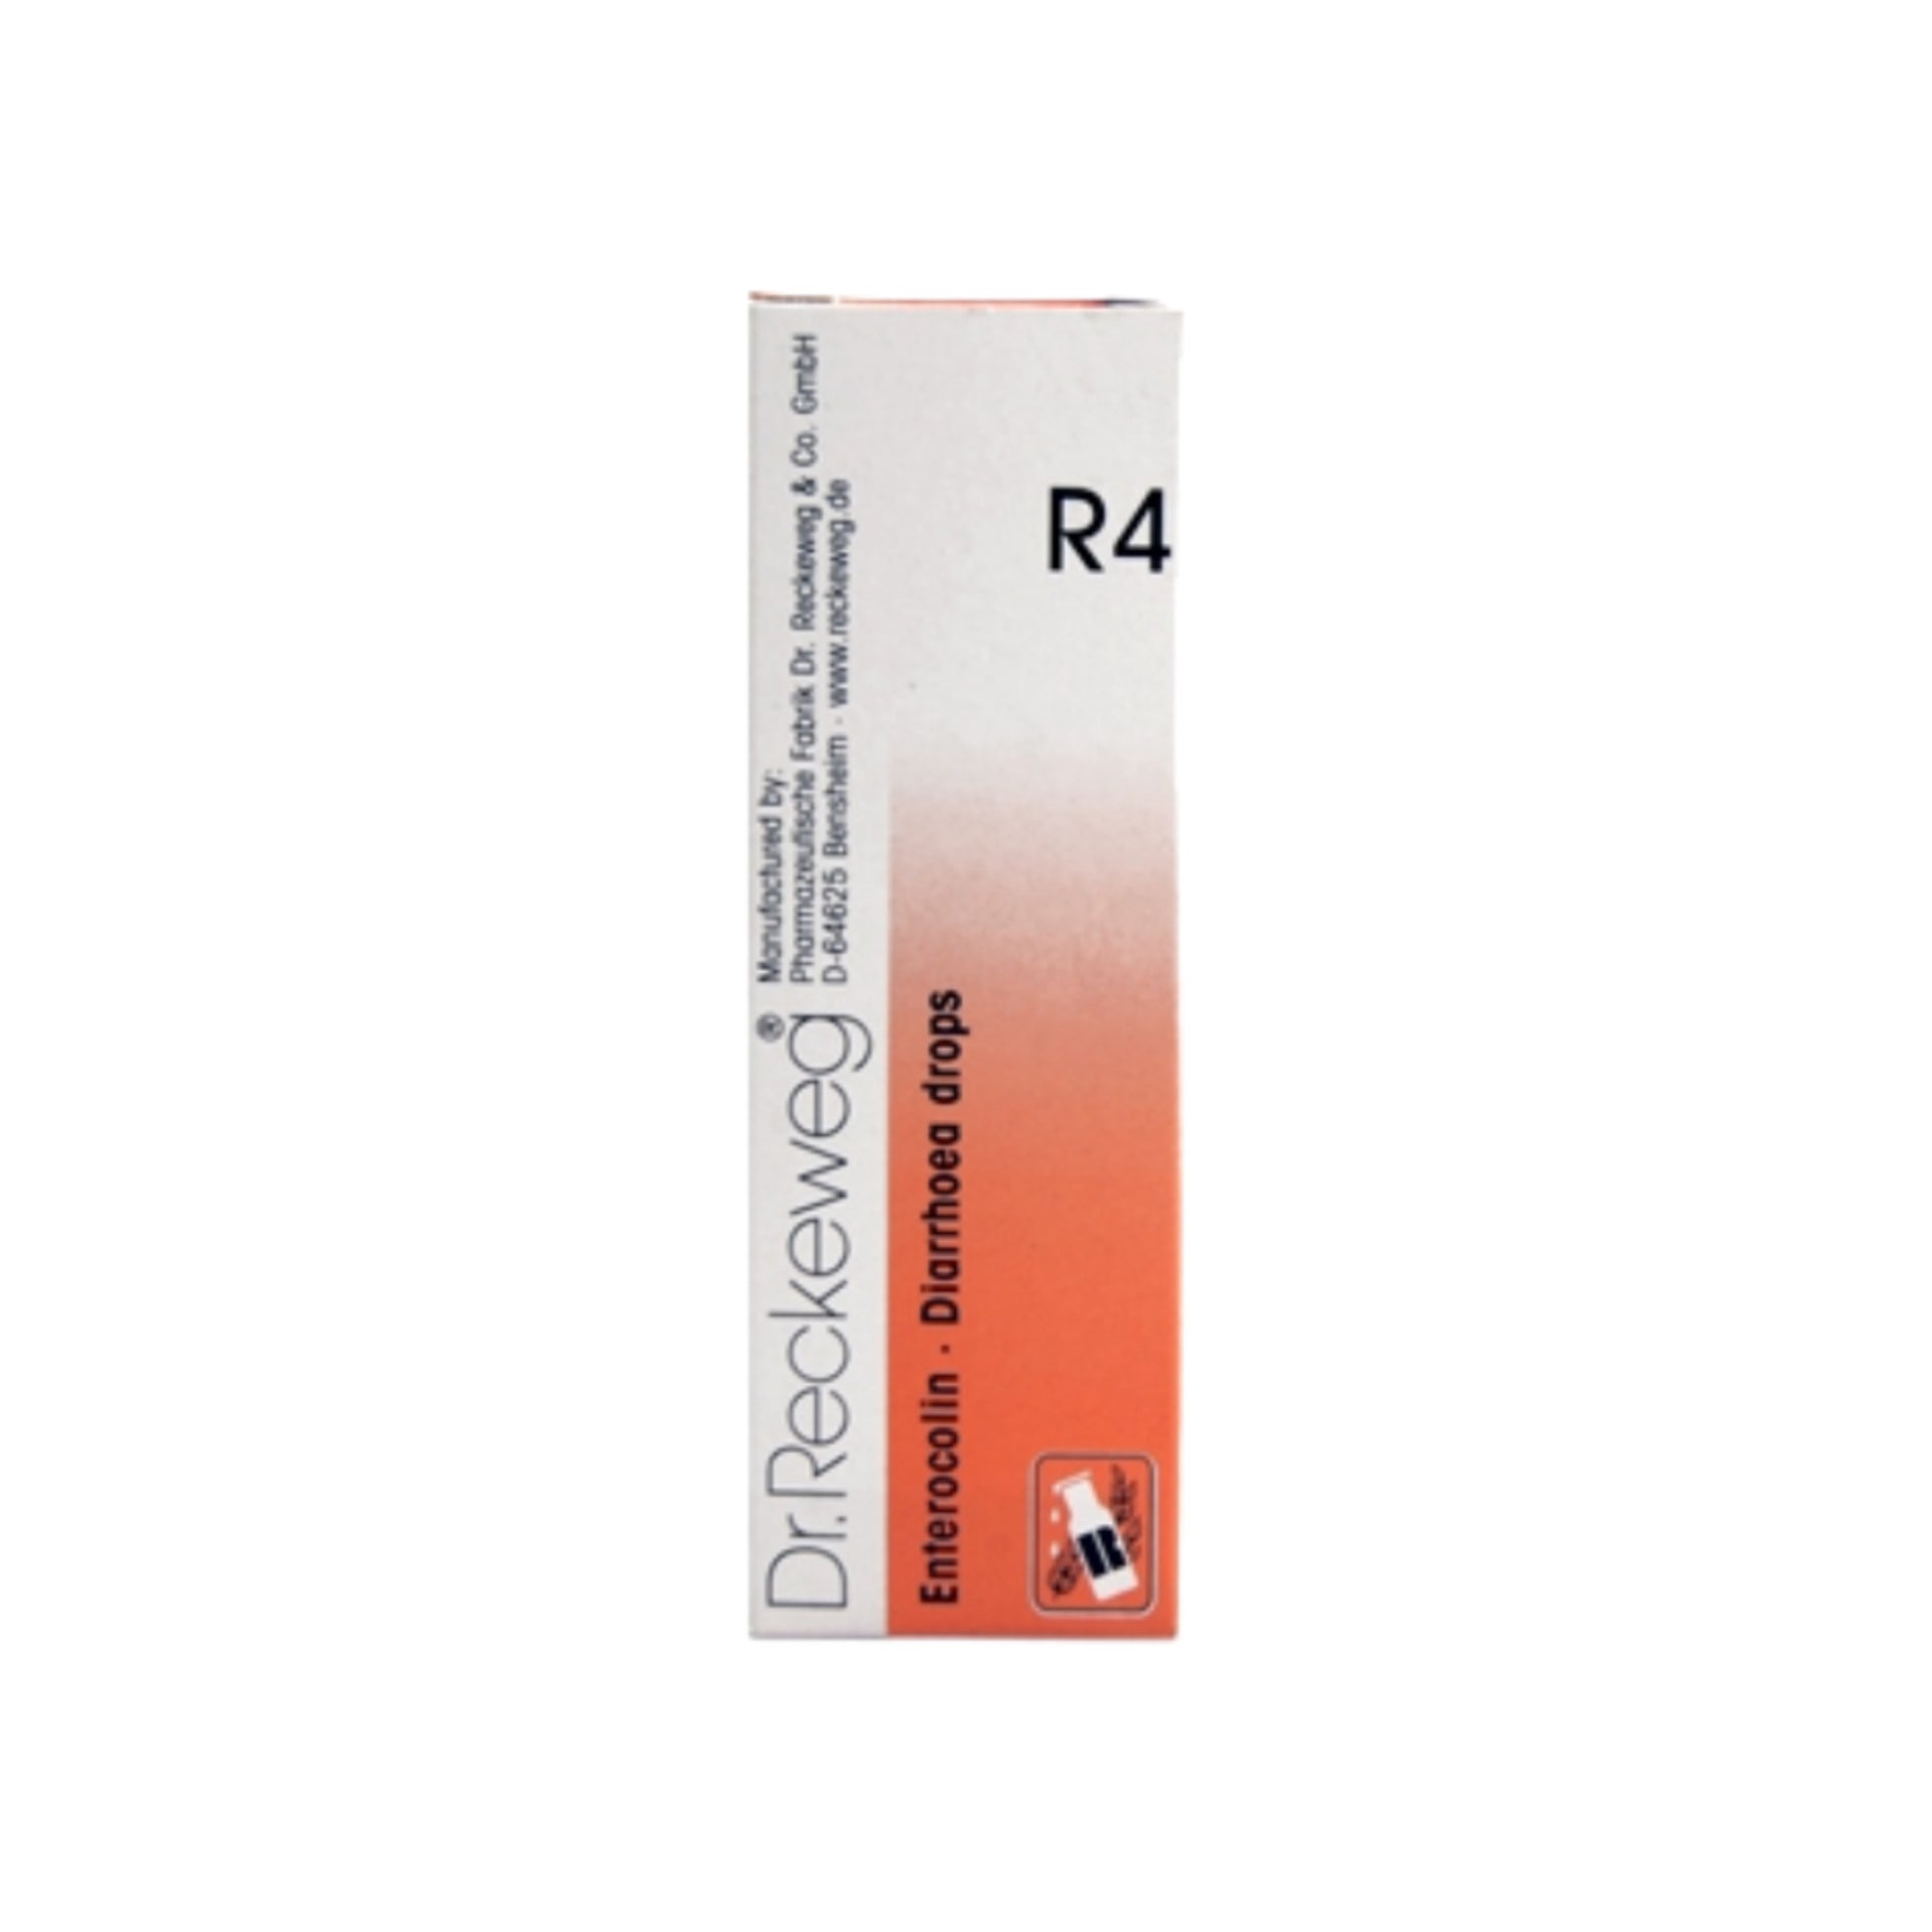 Image for DR. RECKEWEG R4 - Diarrhea Drops 22 ml: Effective homeopathic treatment for diarrhea and intestinal spasms